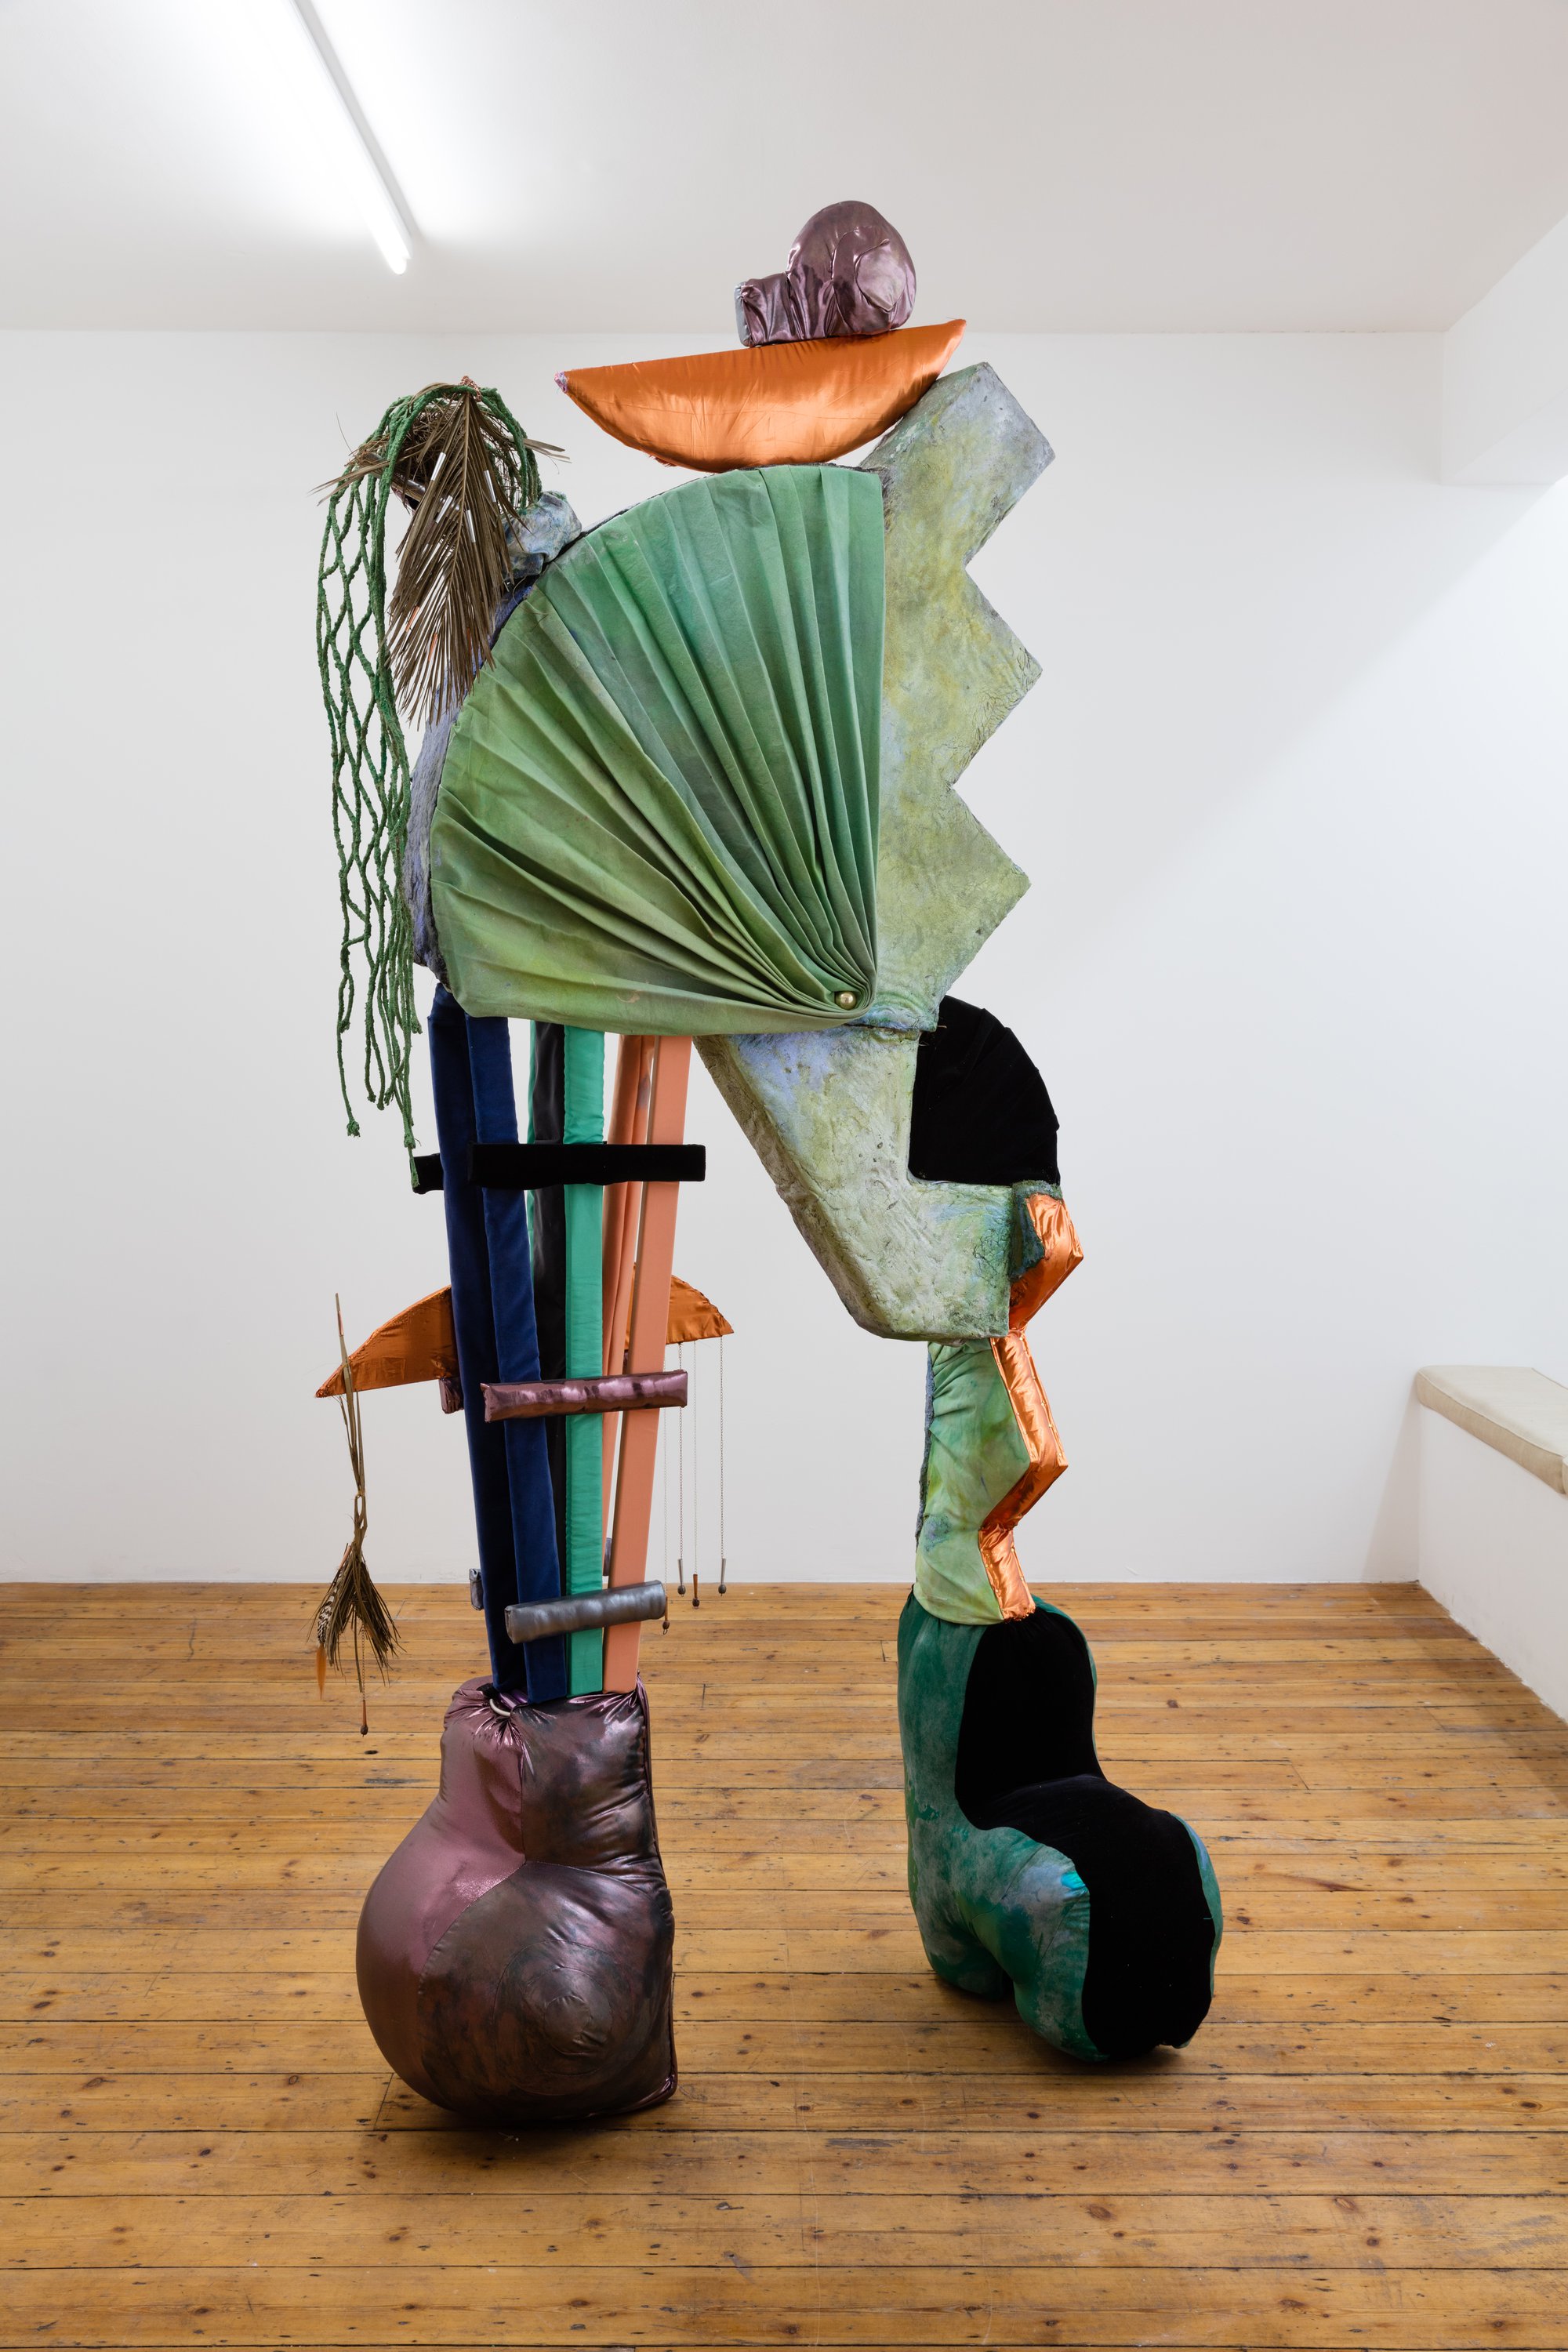 Tamara Henderson, The Scarecrow&#x27;s Holiday, textile, wood, glass, sand, pigment, rope, 260 x 112 x 56 cm (102 1/3 x 44 x 22 in), 2015